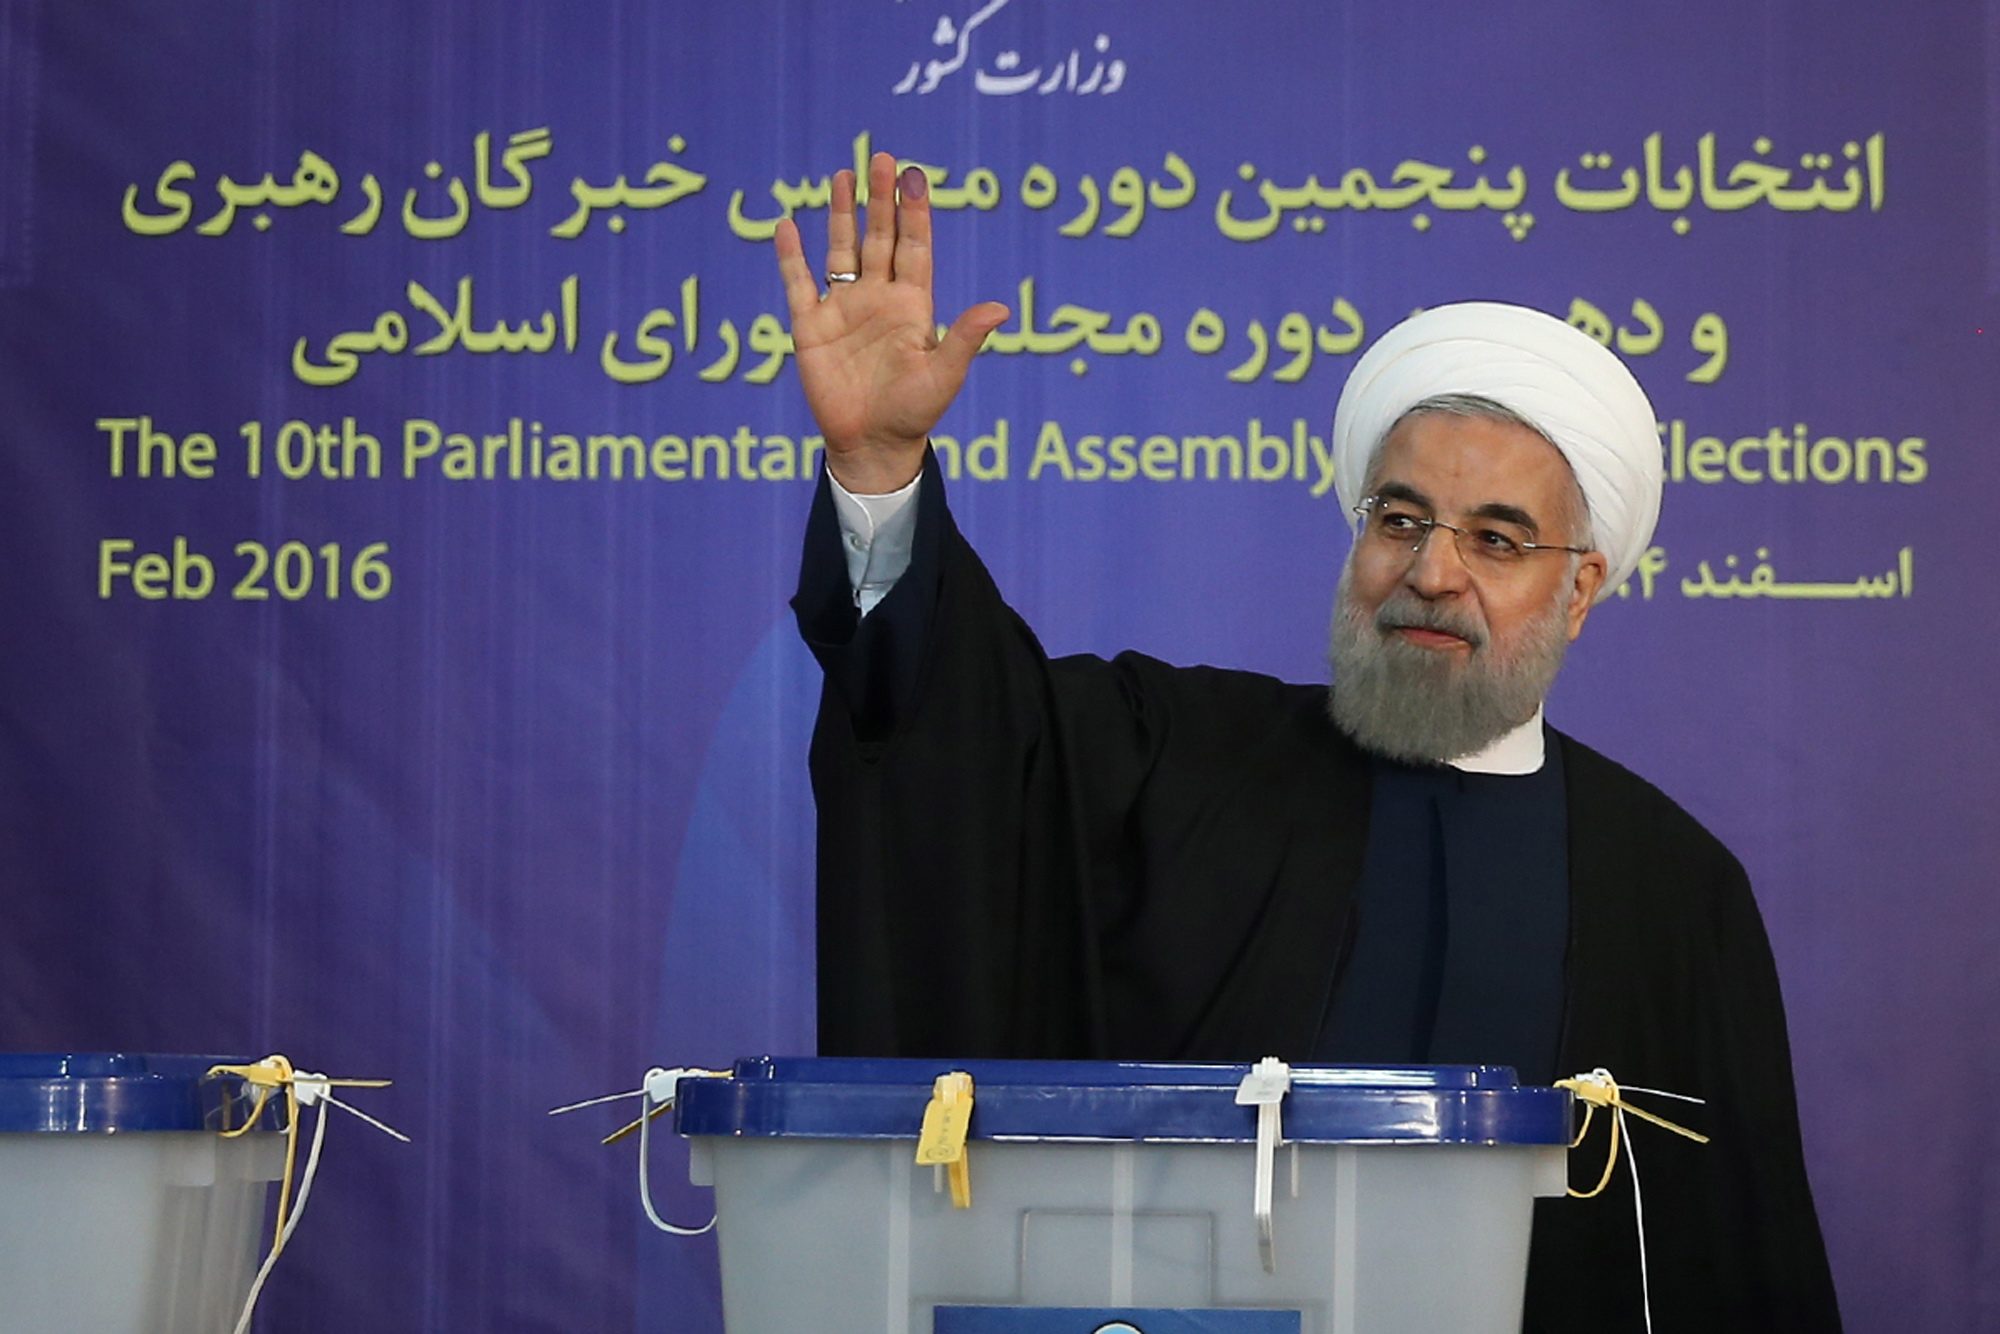 Rouhani says Iran voters chose ‘right and proper path’